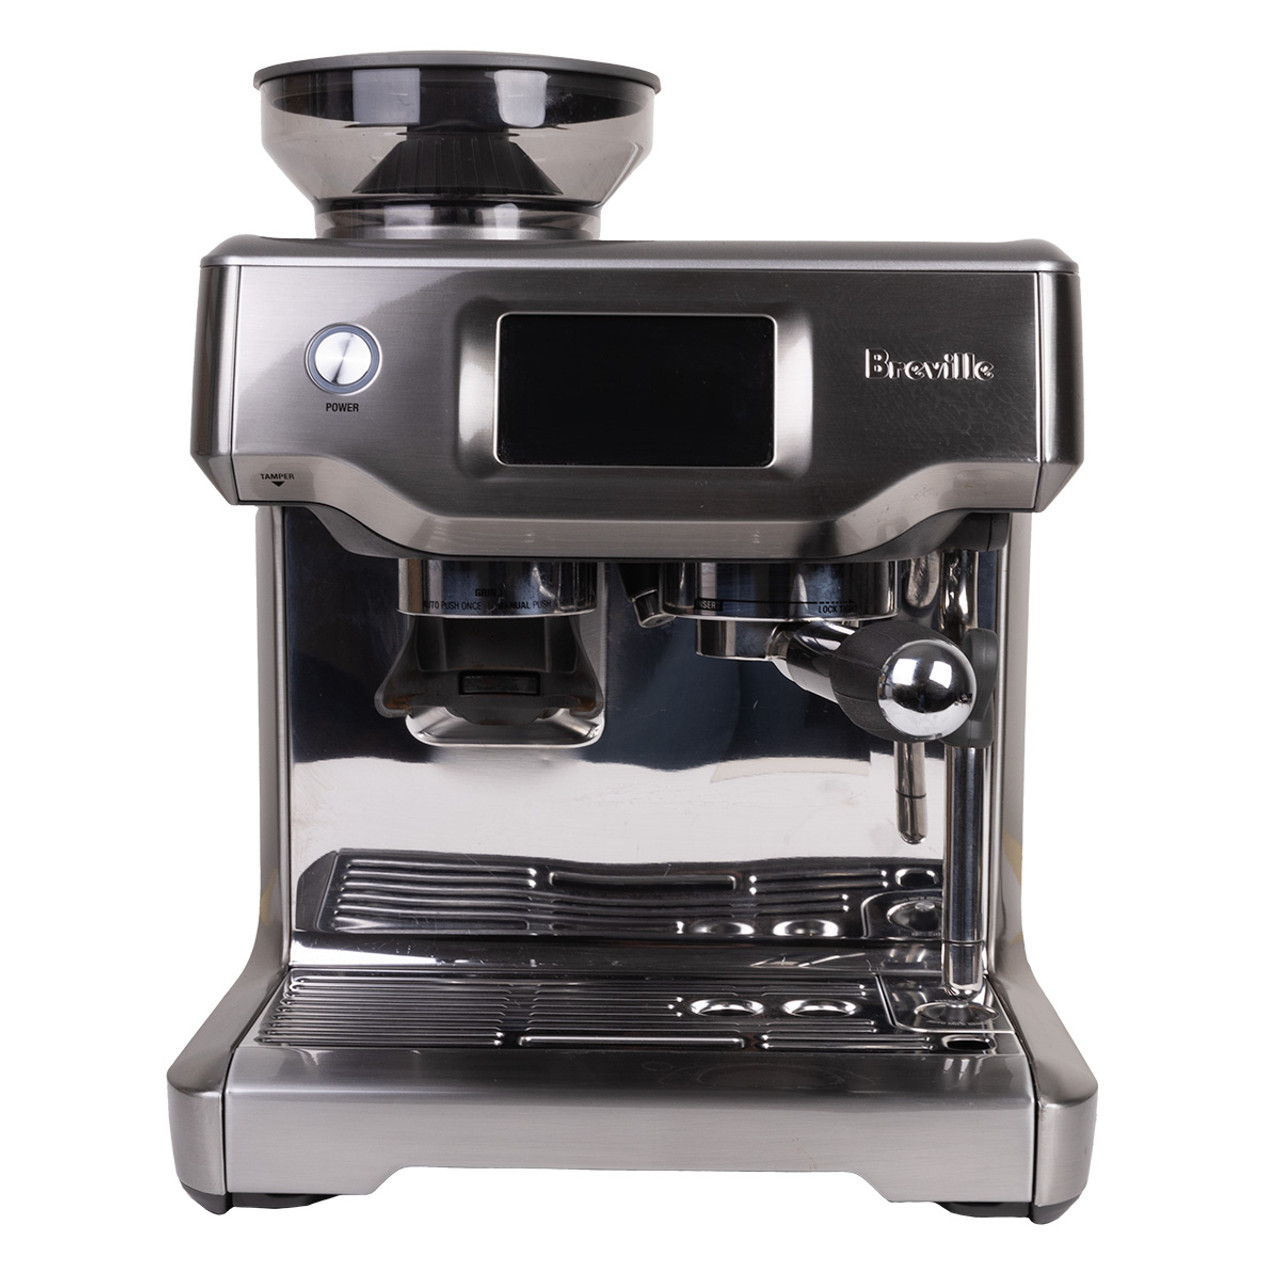 Marco Ottomatic Coffee Maker - Barista Collection